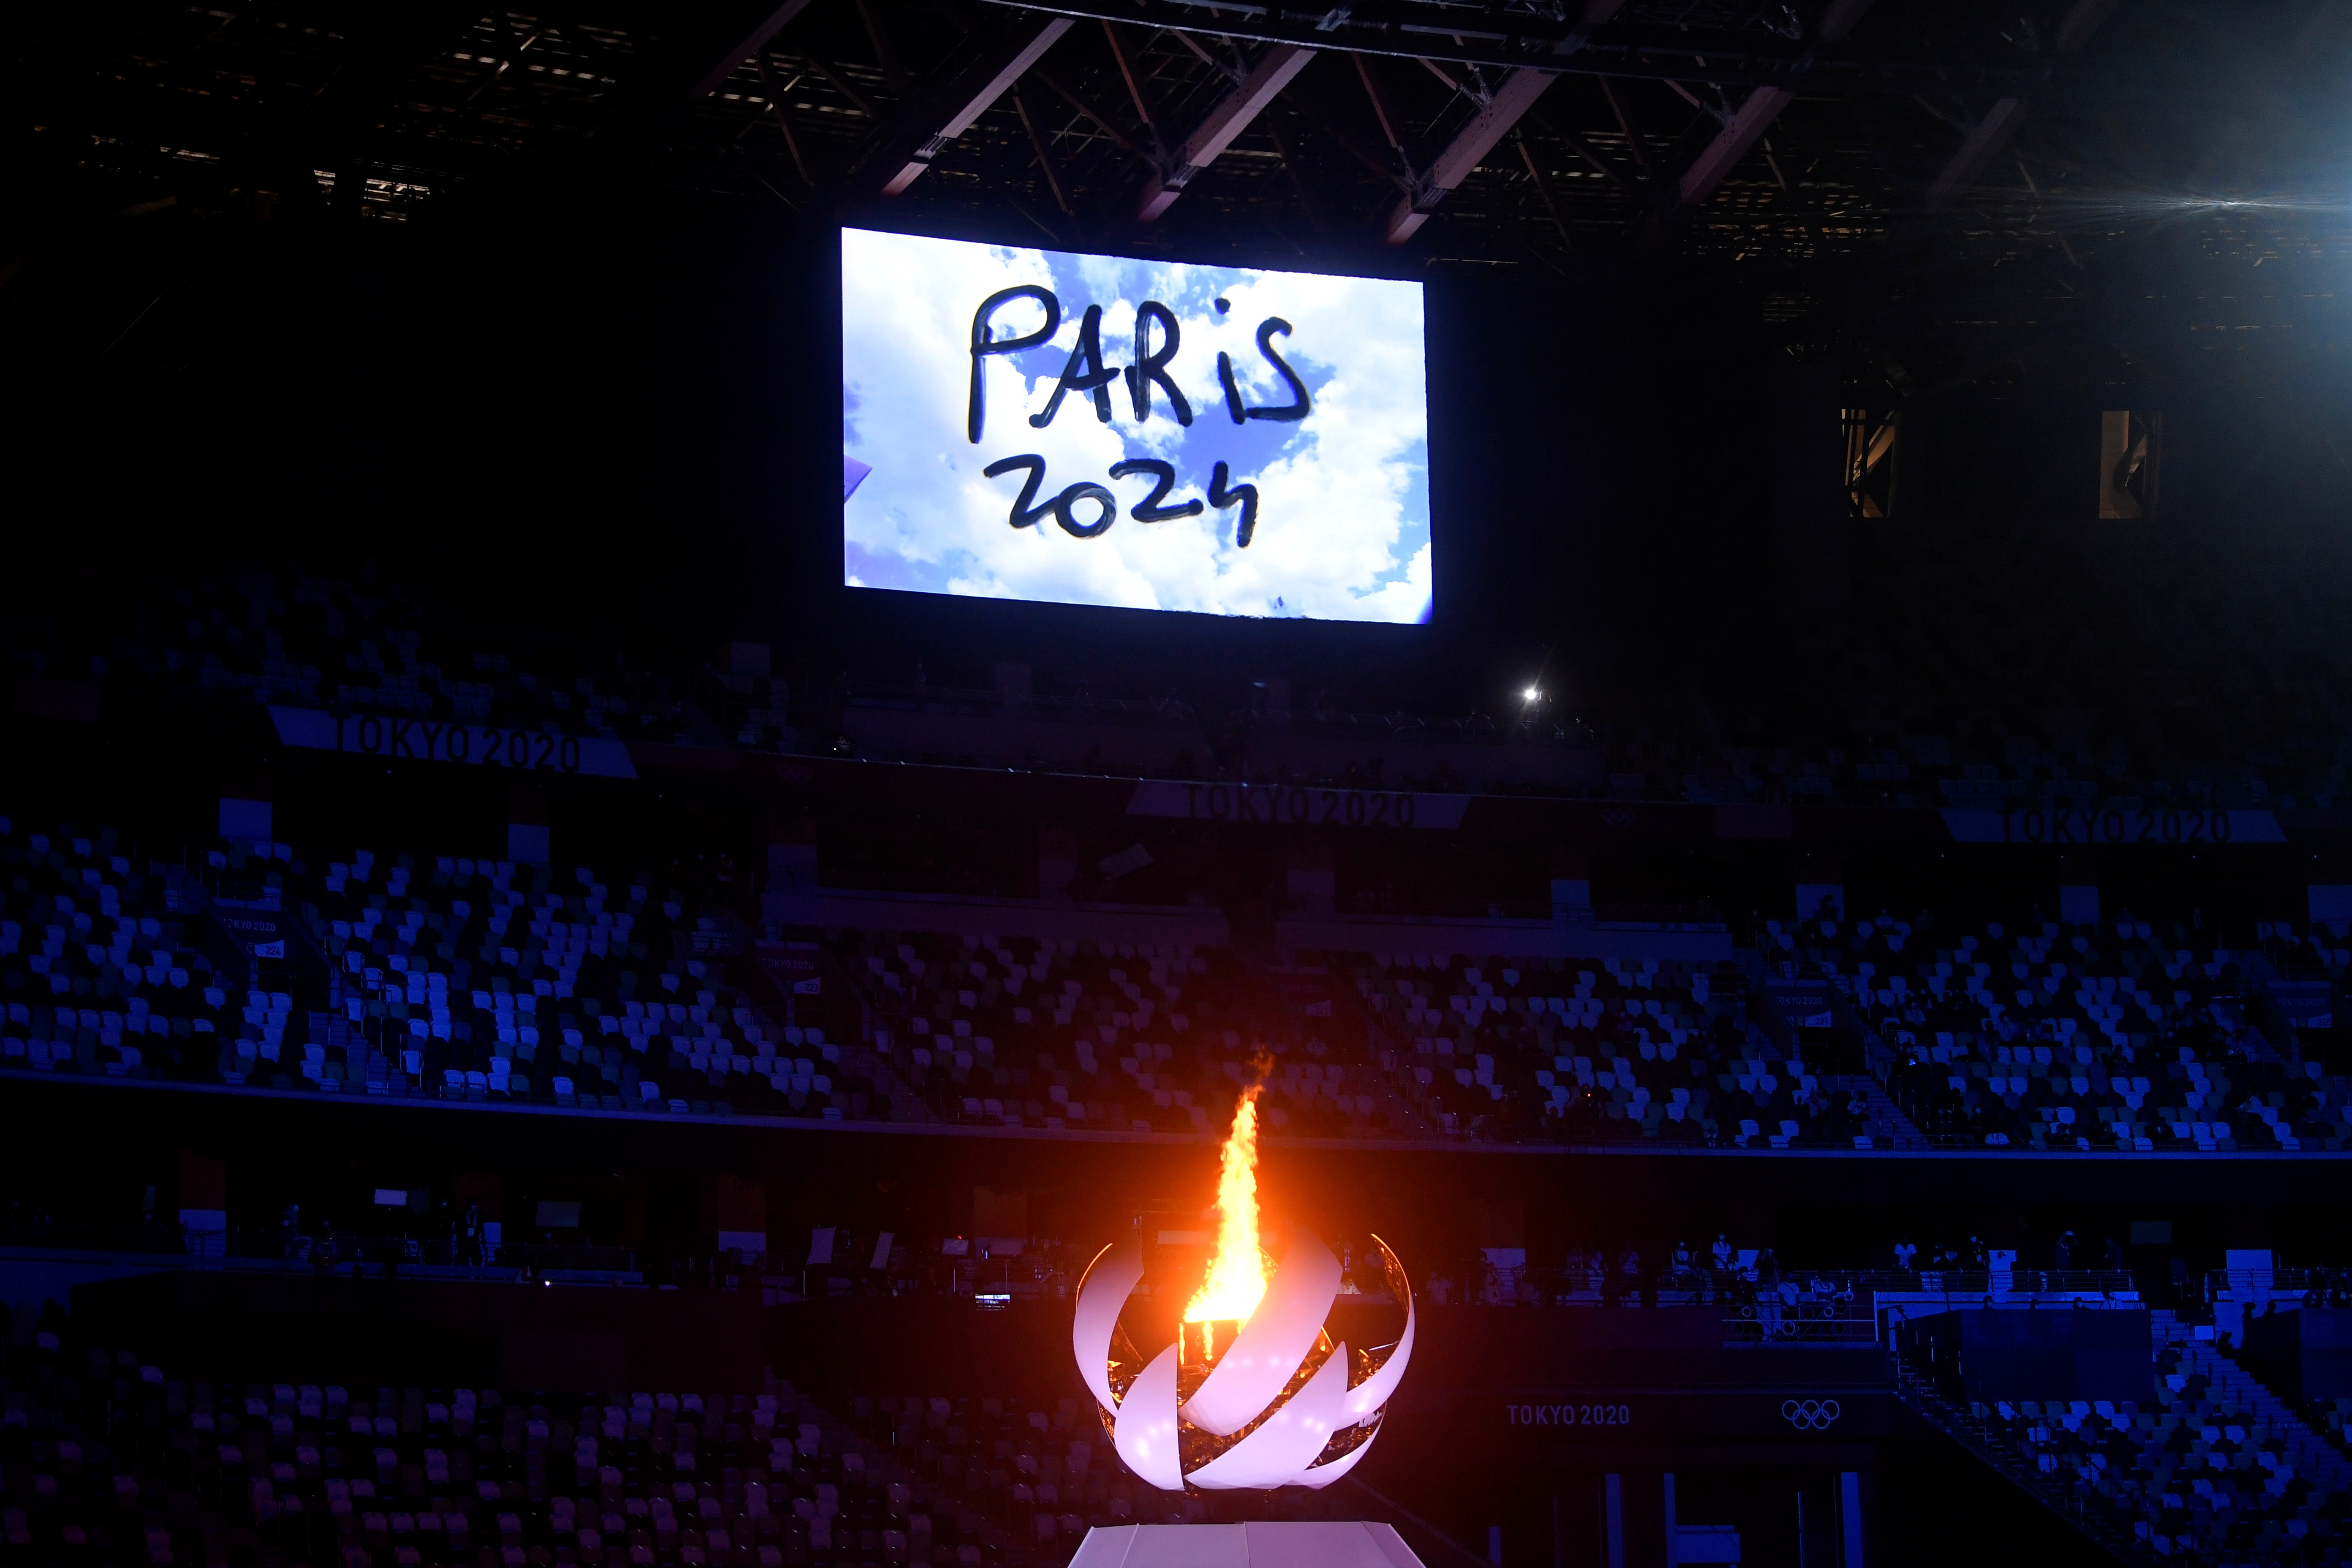 Paris 2024 organizers reaffirm commitment to anti-doping